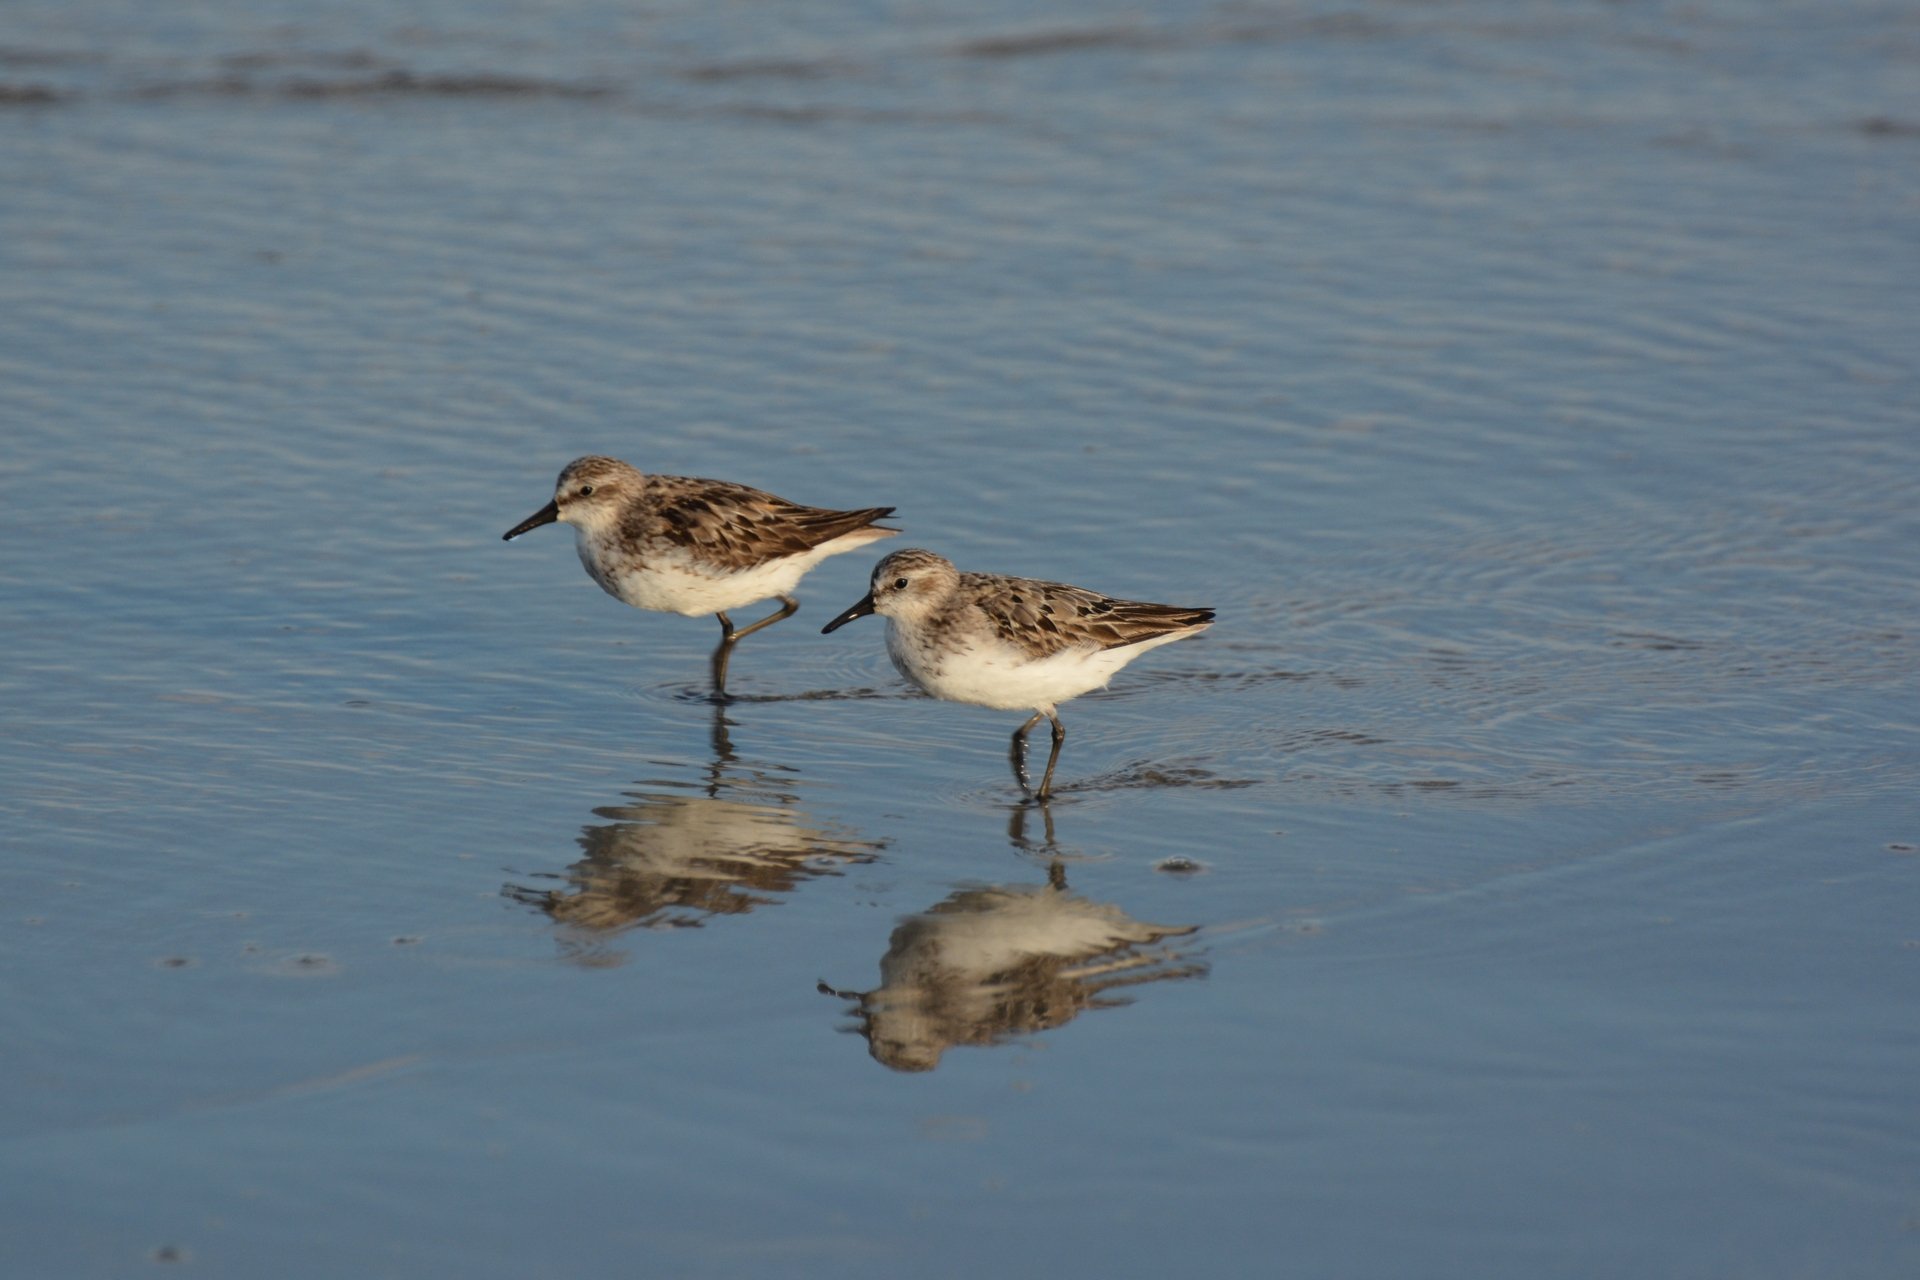 Two Semipalmated Sandpipers wading in a shallow pool of water.